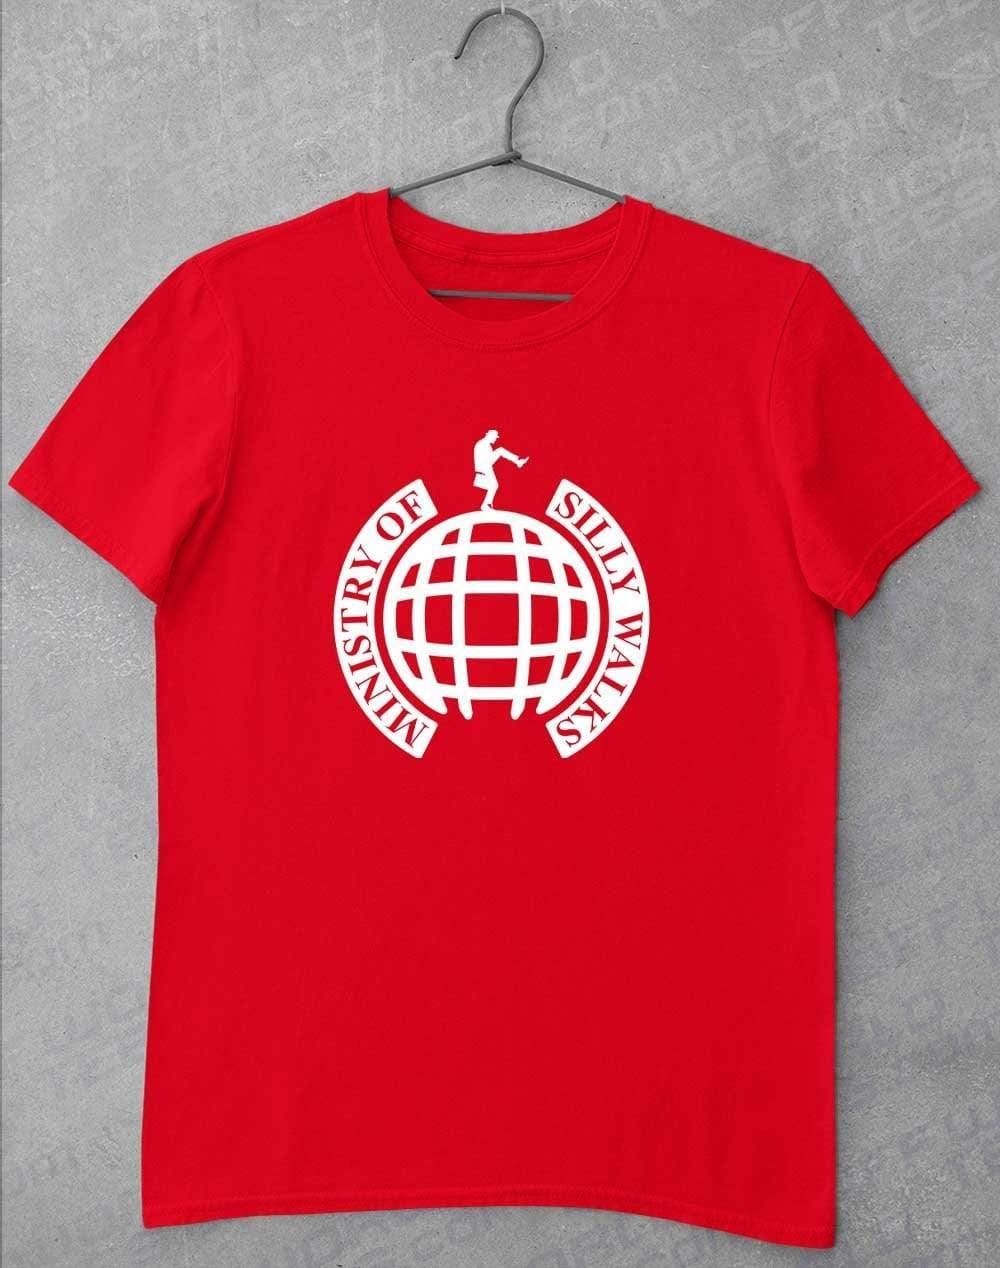 Ministry of Silly Walks T-Shirt S / Red  - Off World Tees